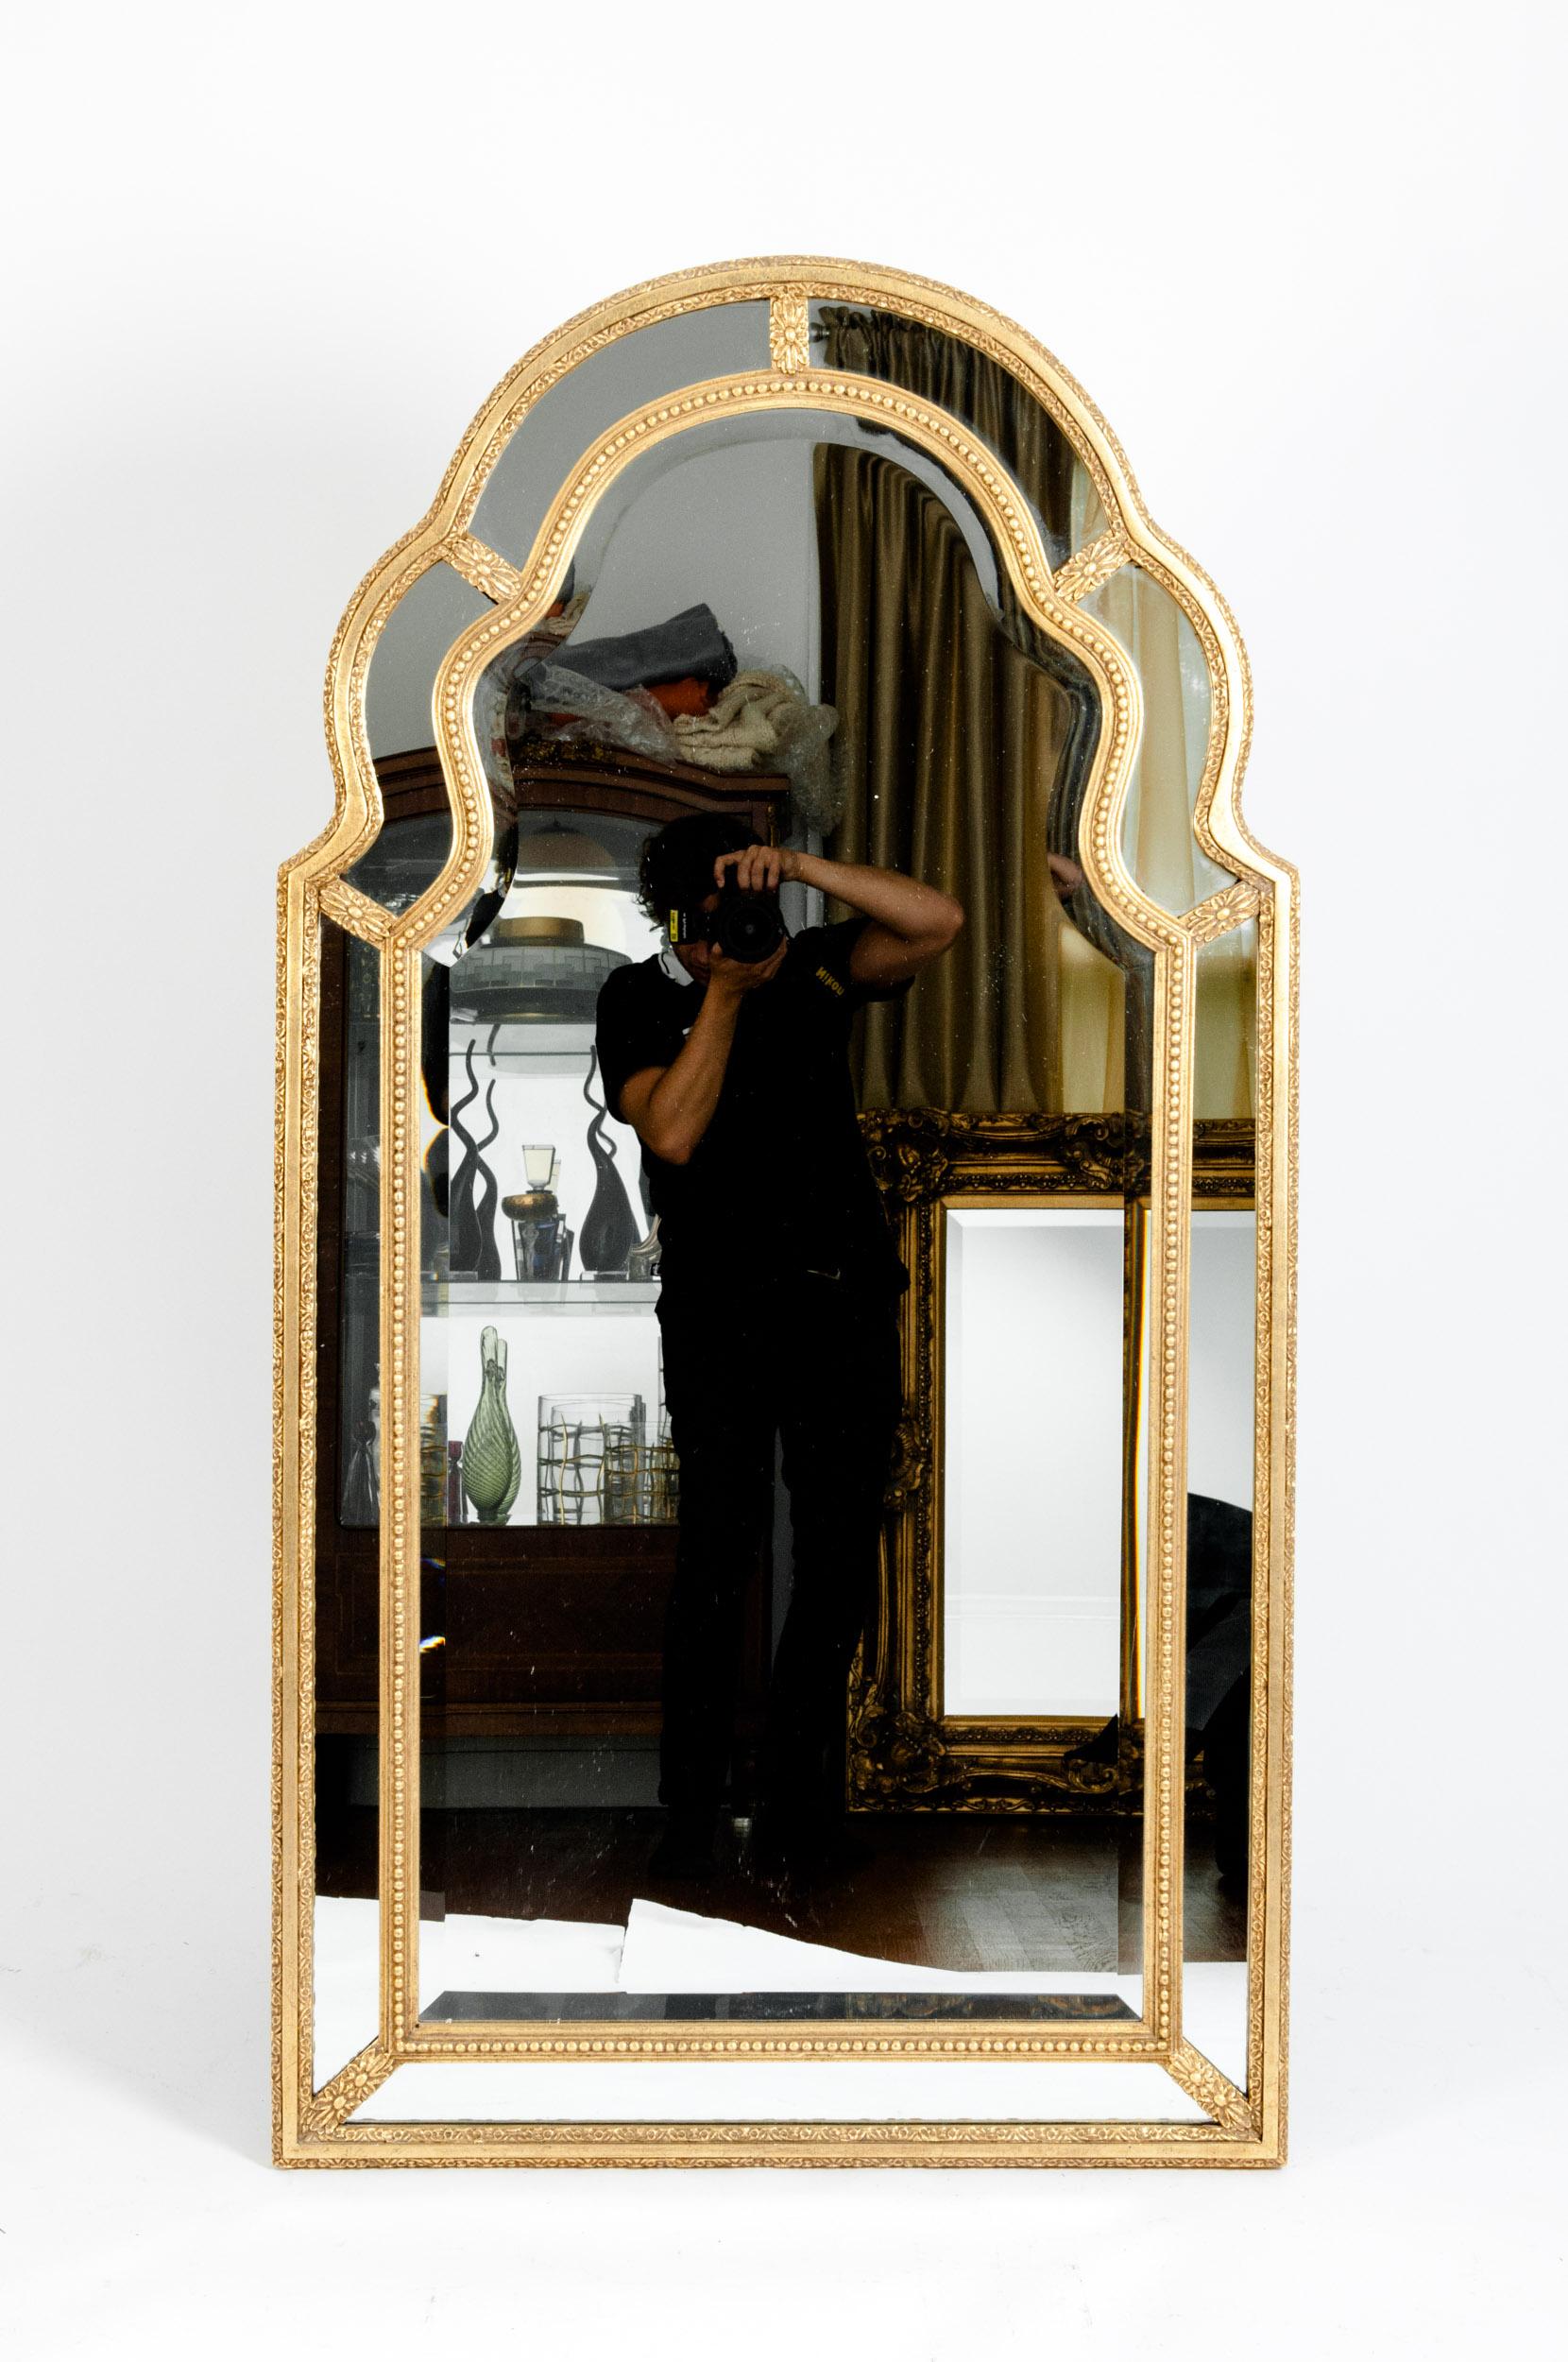 Mid-20th century giltwood frame arched top beveled hanging wall mantel mirror. The mirror is in great condition with appropriate wear consistent with age / use. The mirror measure about 56 inches high x 30 inches wide.